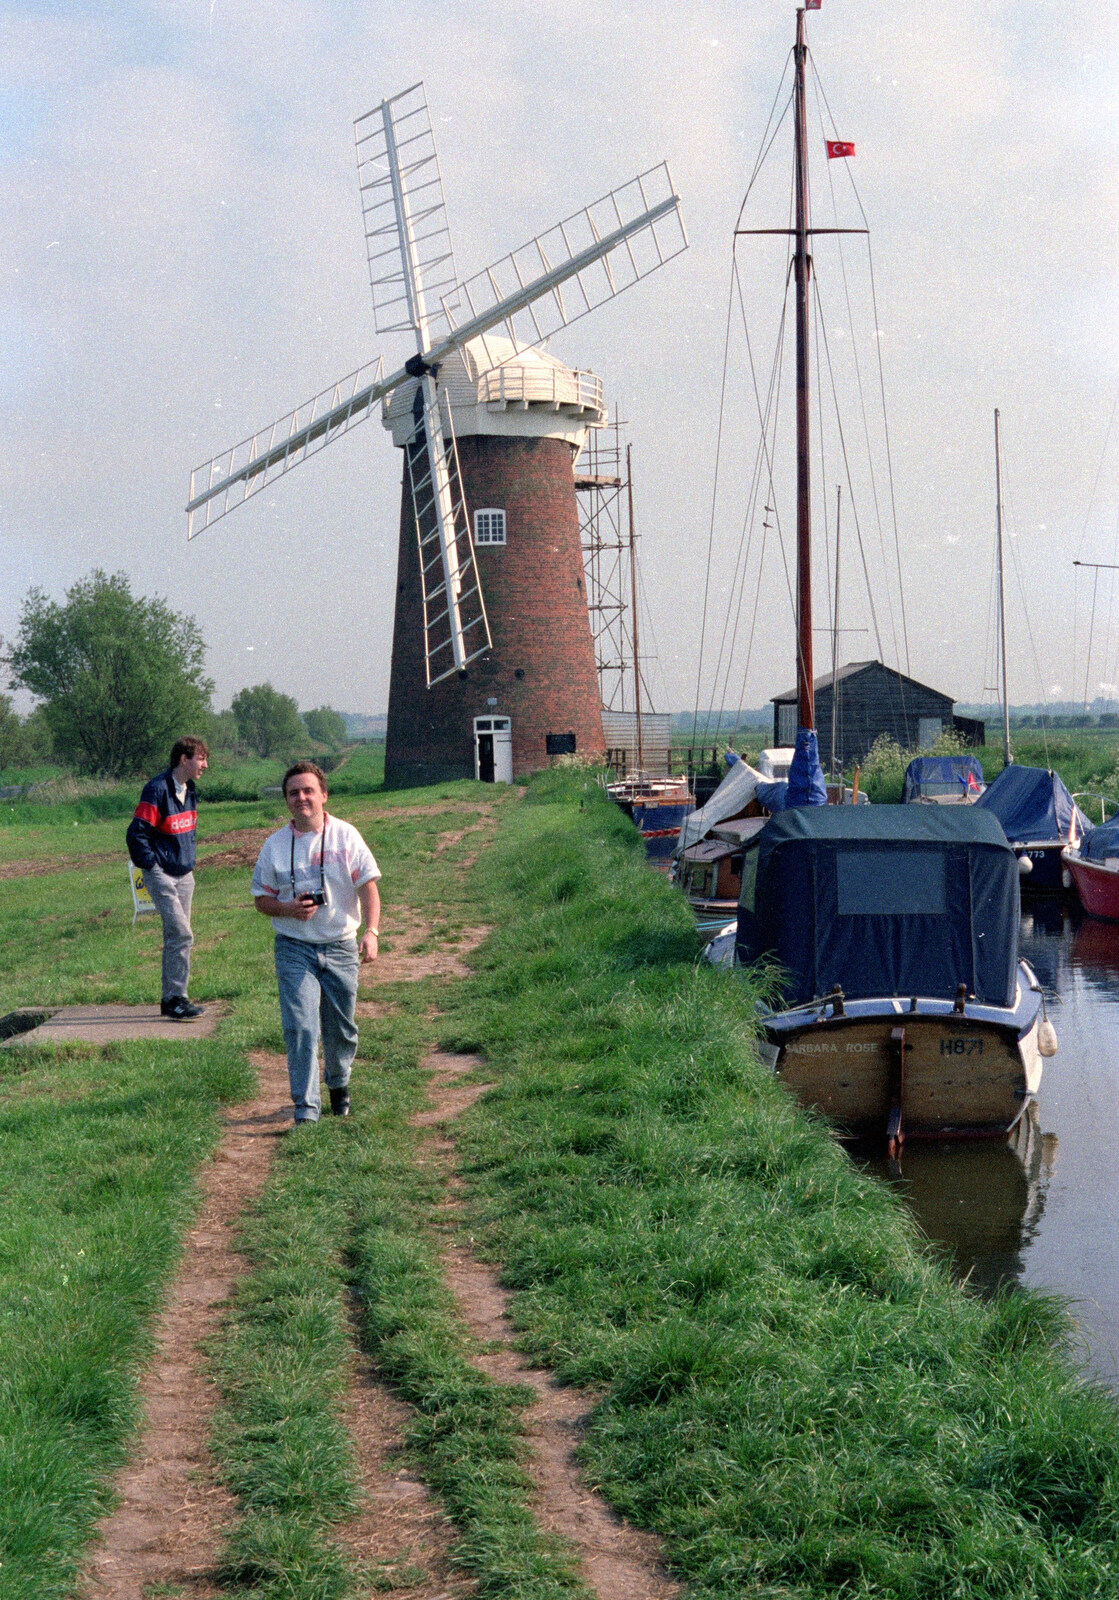 Dave and Andy near Horsey Wind Pump from The Plymouth Gang Visits Nosher in the Sticks, Red House, Buxton, Norfolk - 20th May 1988